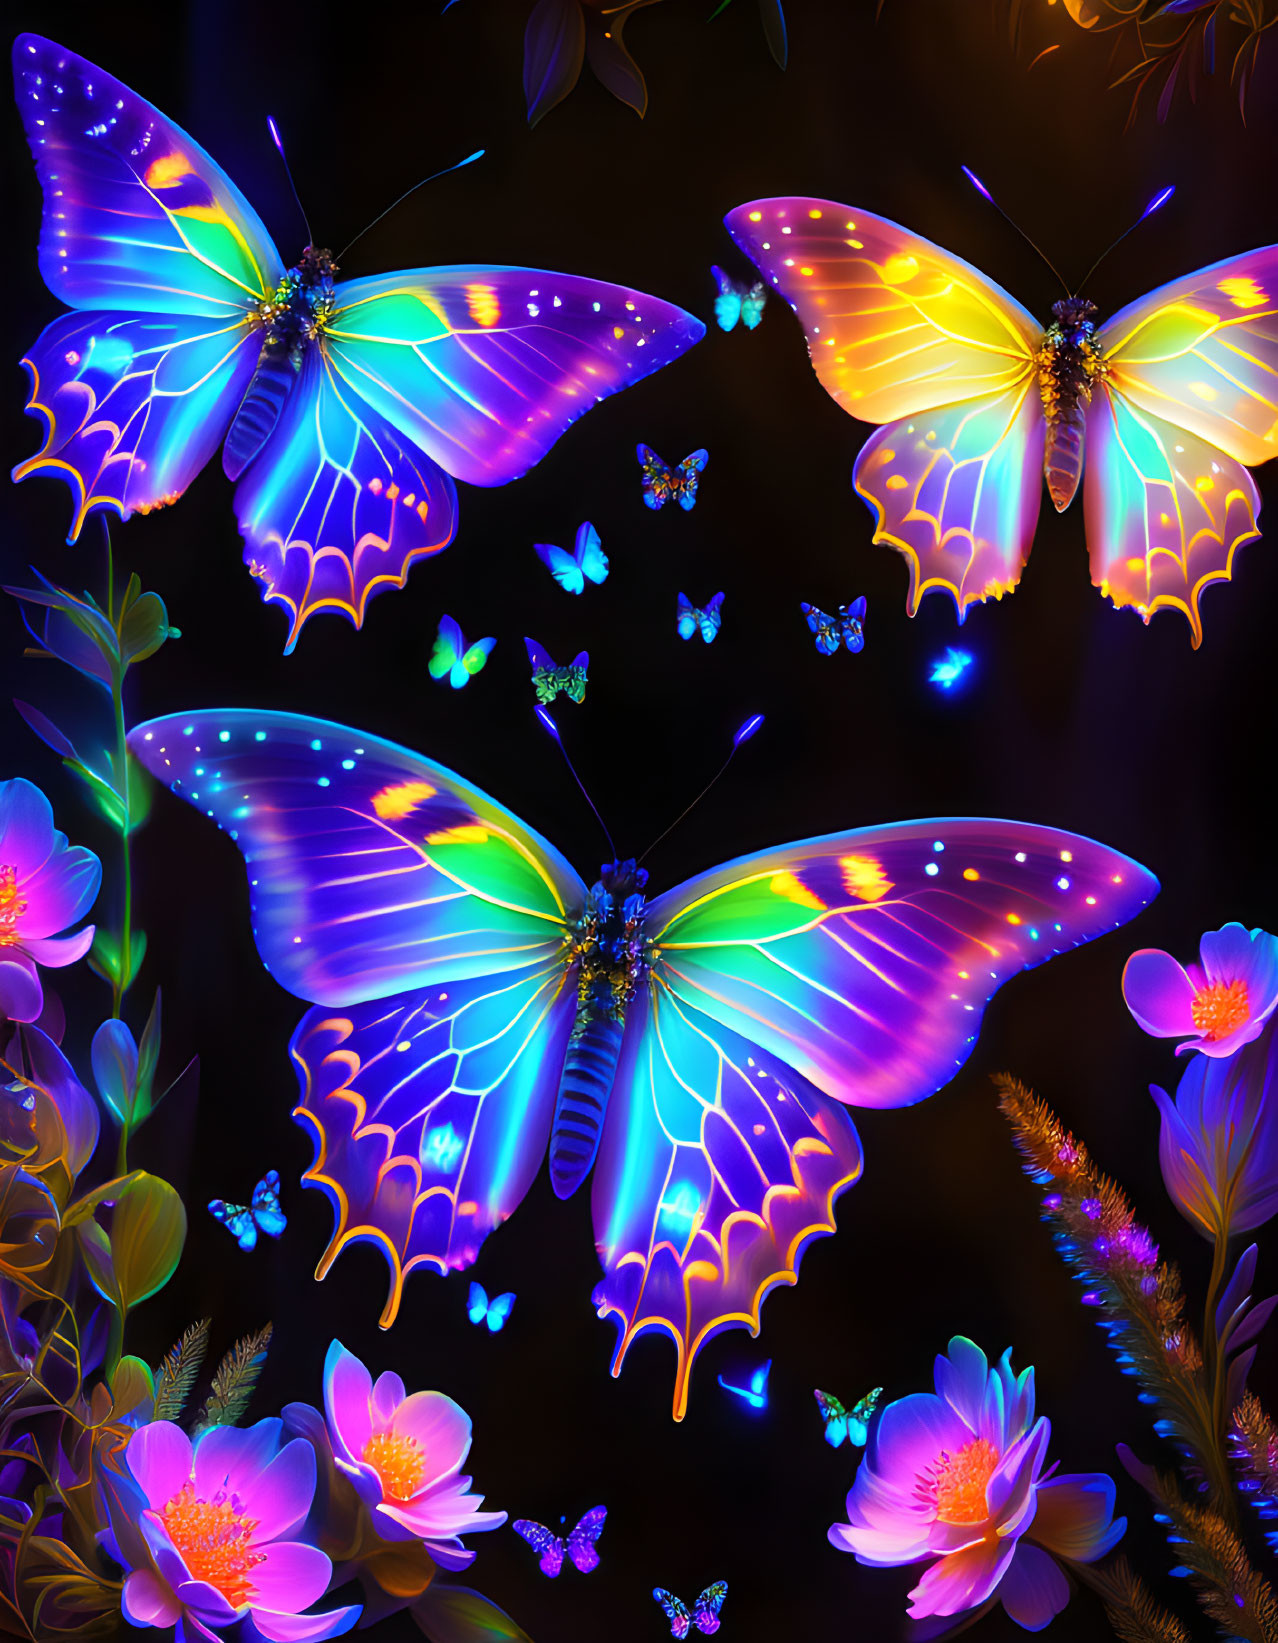 Colorful glowing butterflies fluttering among luminous flowers on dark background